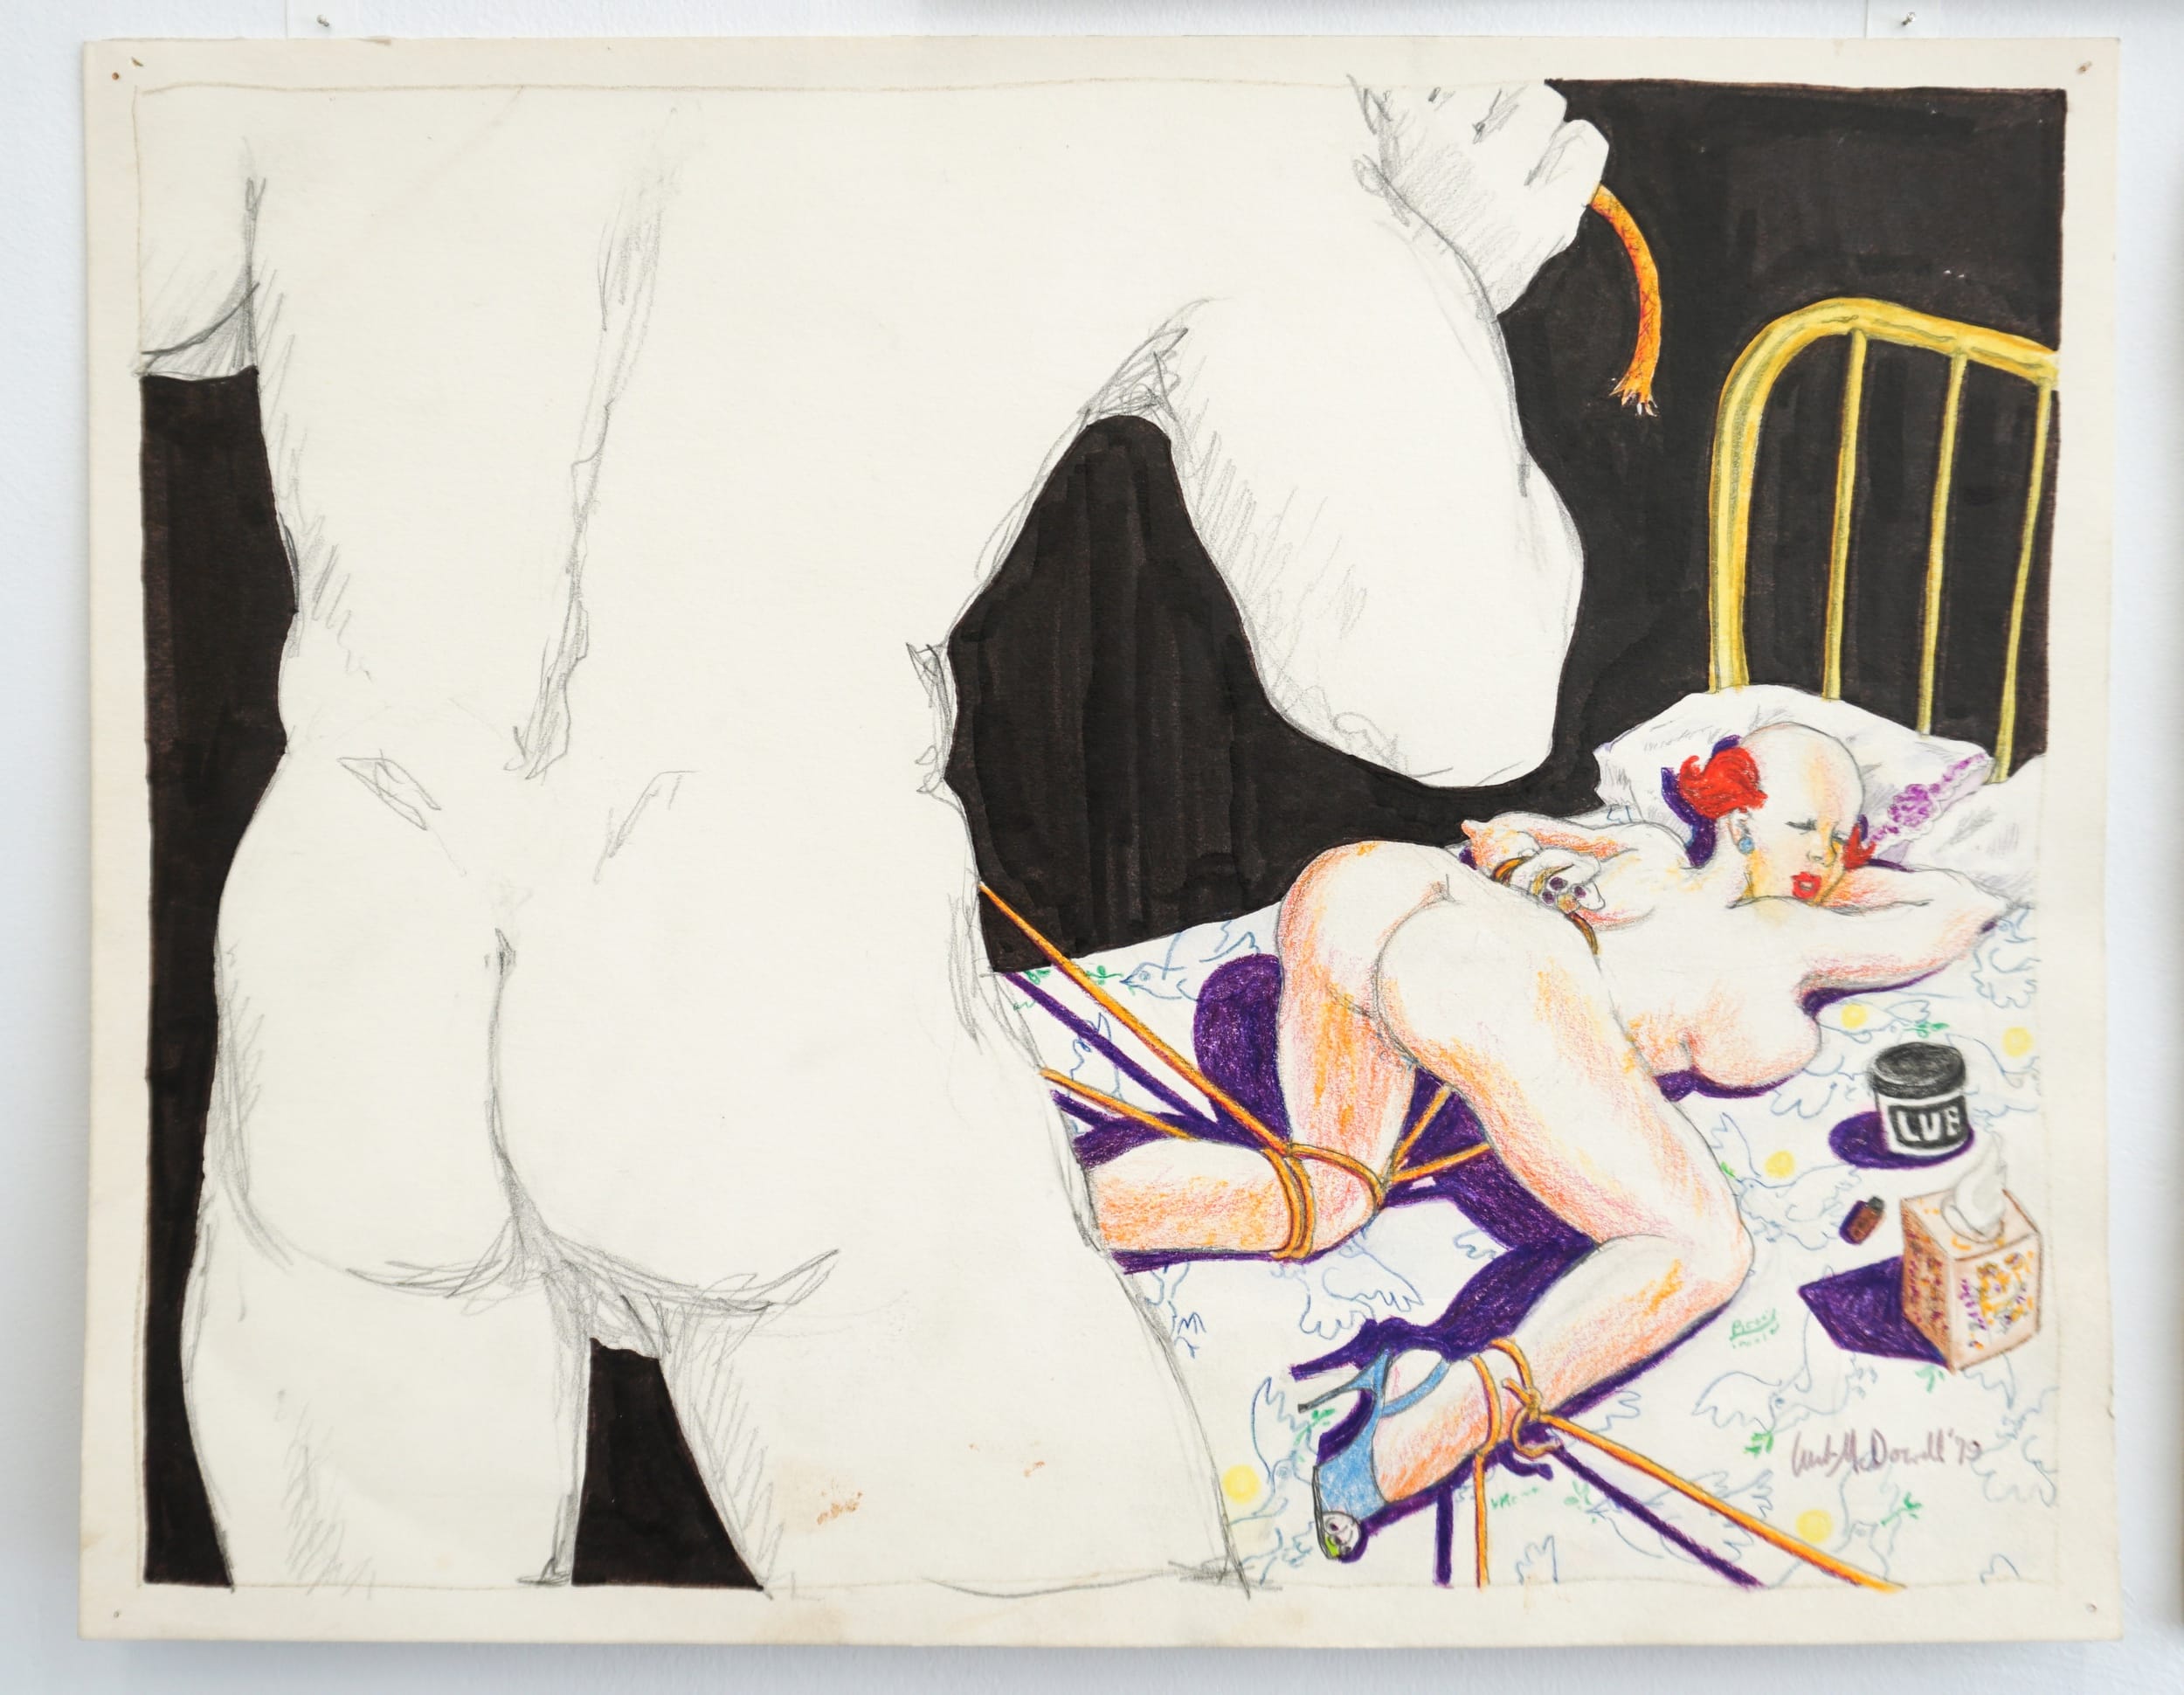  Curt McDowell  Untitled (Loretta on bed) , 1979 Colored graphite, marker on paper 11 x 14 inches 